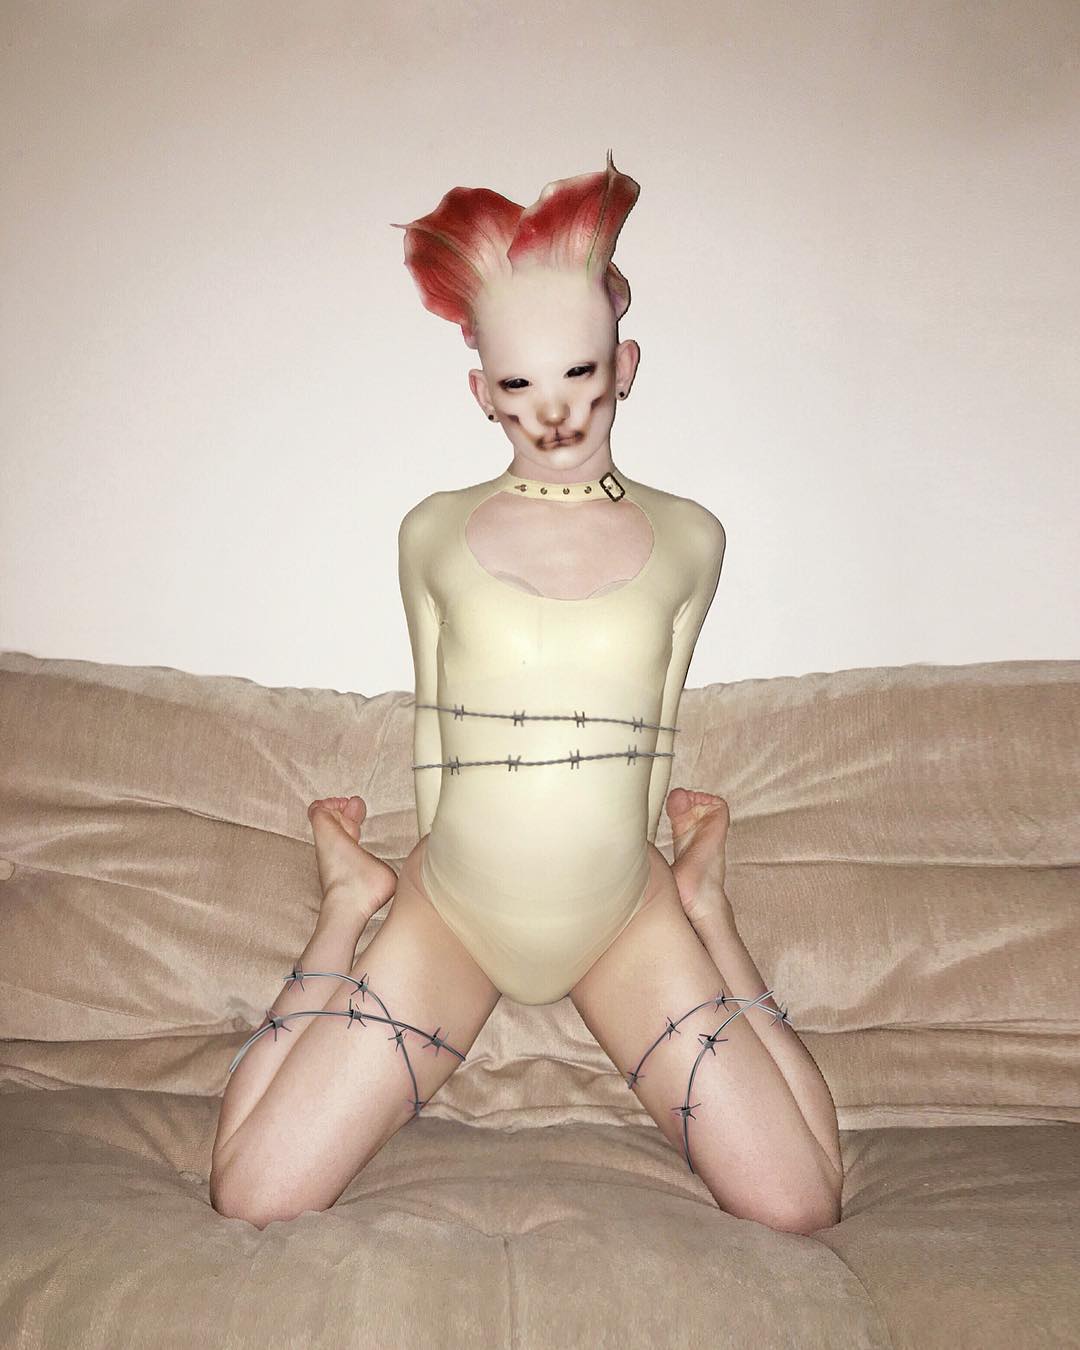 Instagram's New Age Alien Queen Will Creep You Out